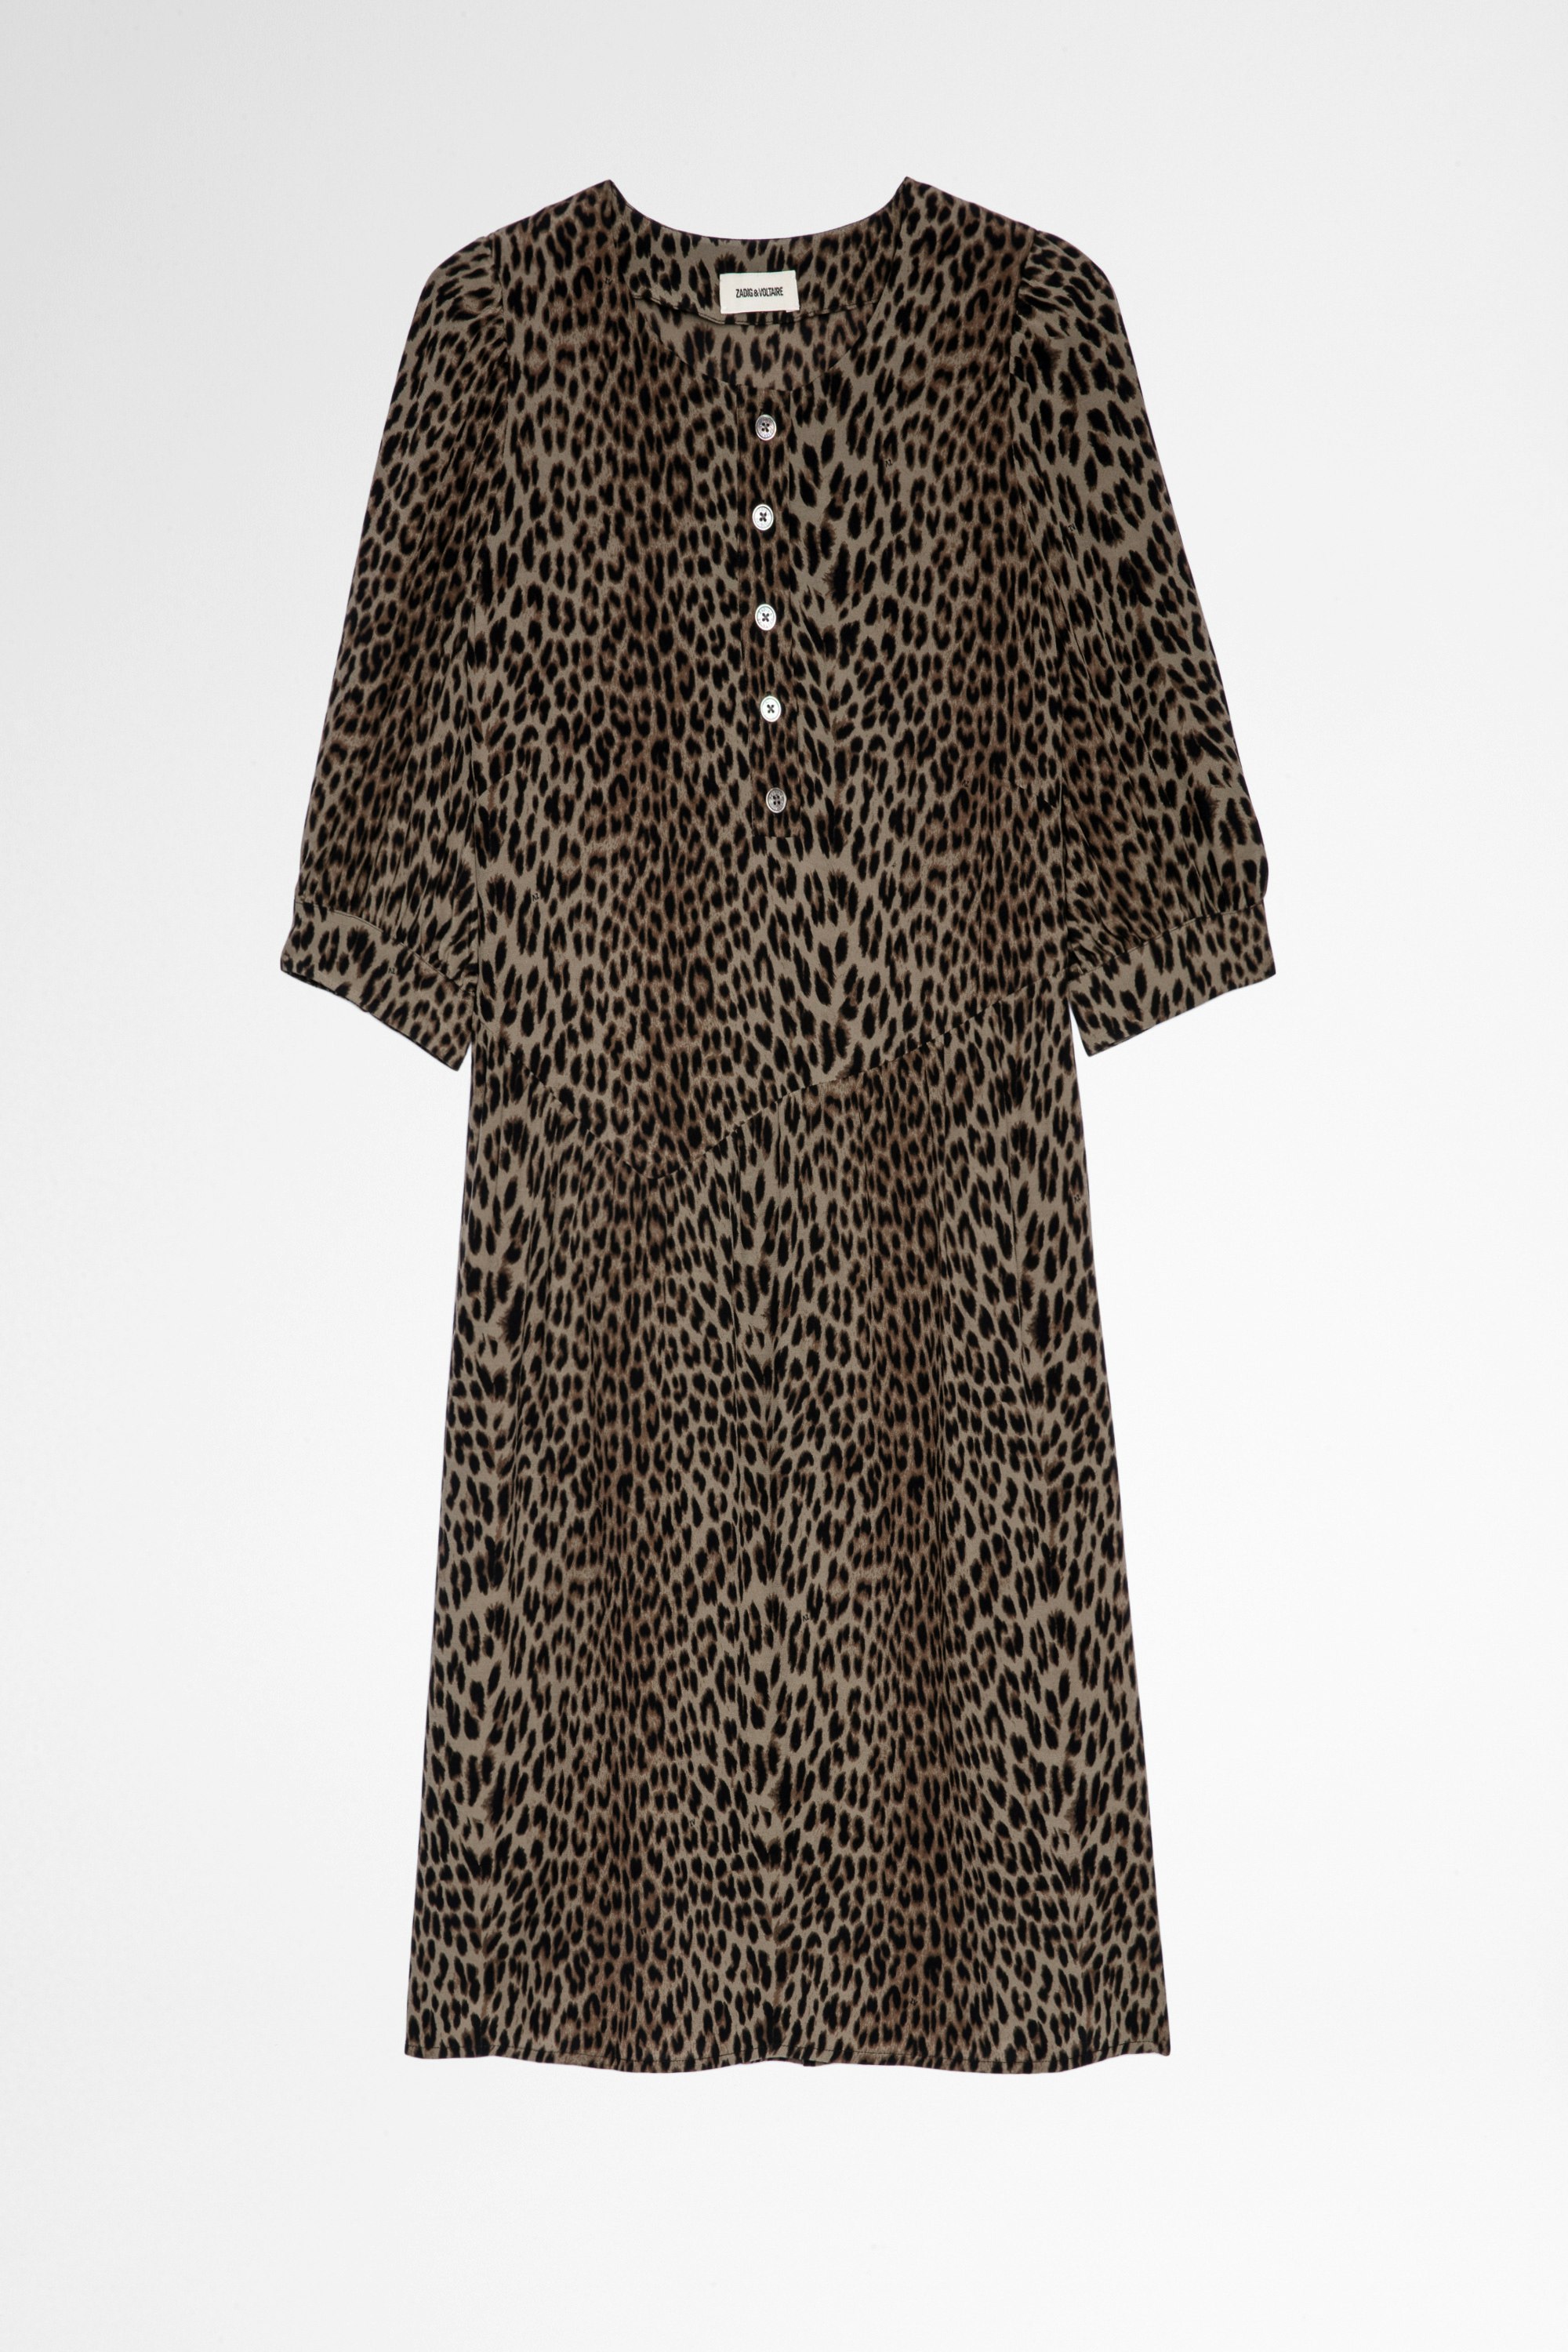 Risla Leopard Dress Women's short khaki leopard print dress. Made with fibers from sustainably managed forests.